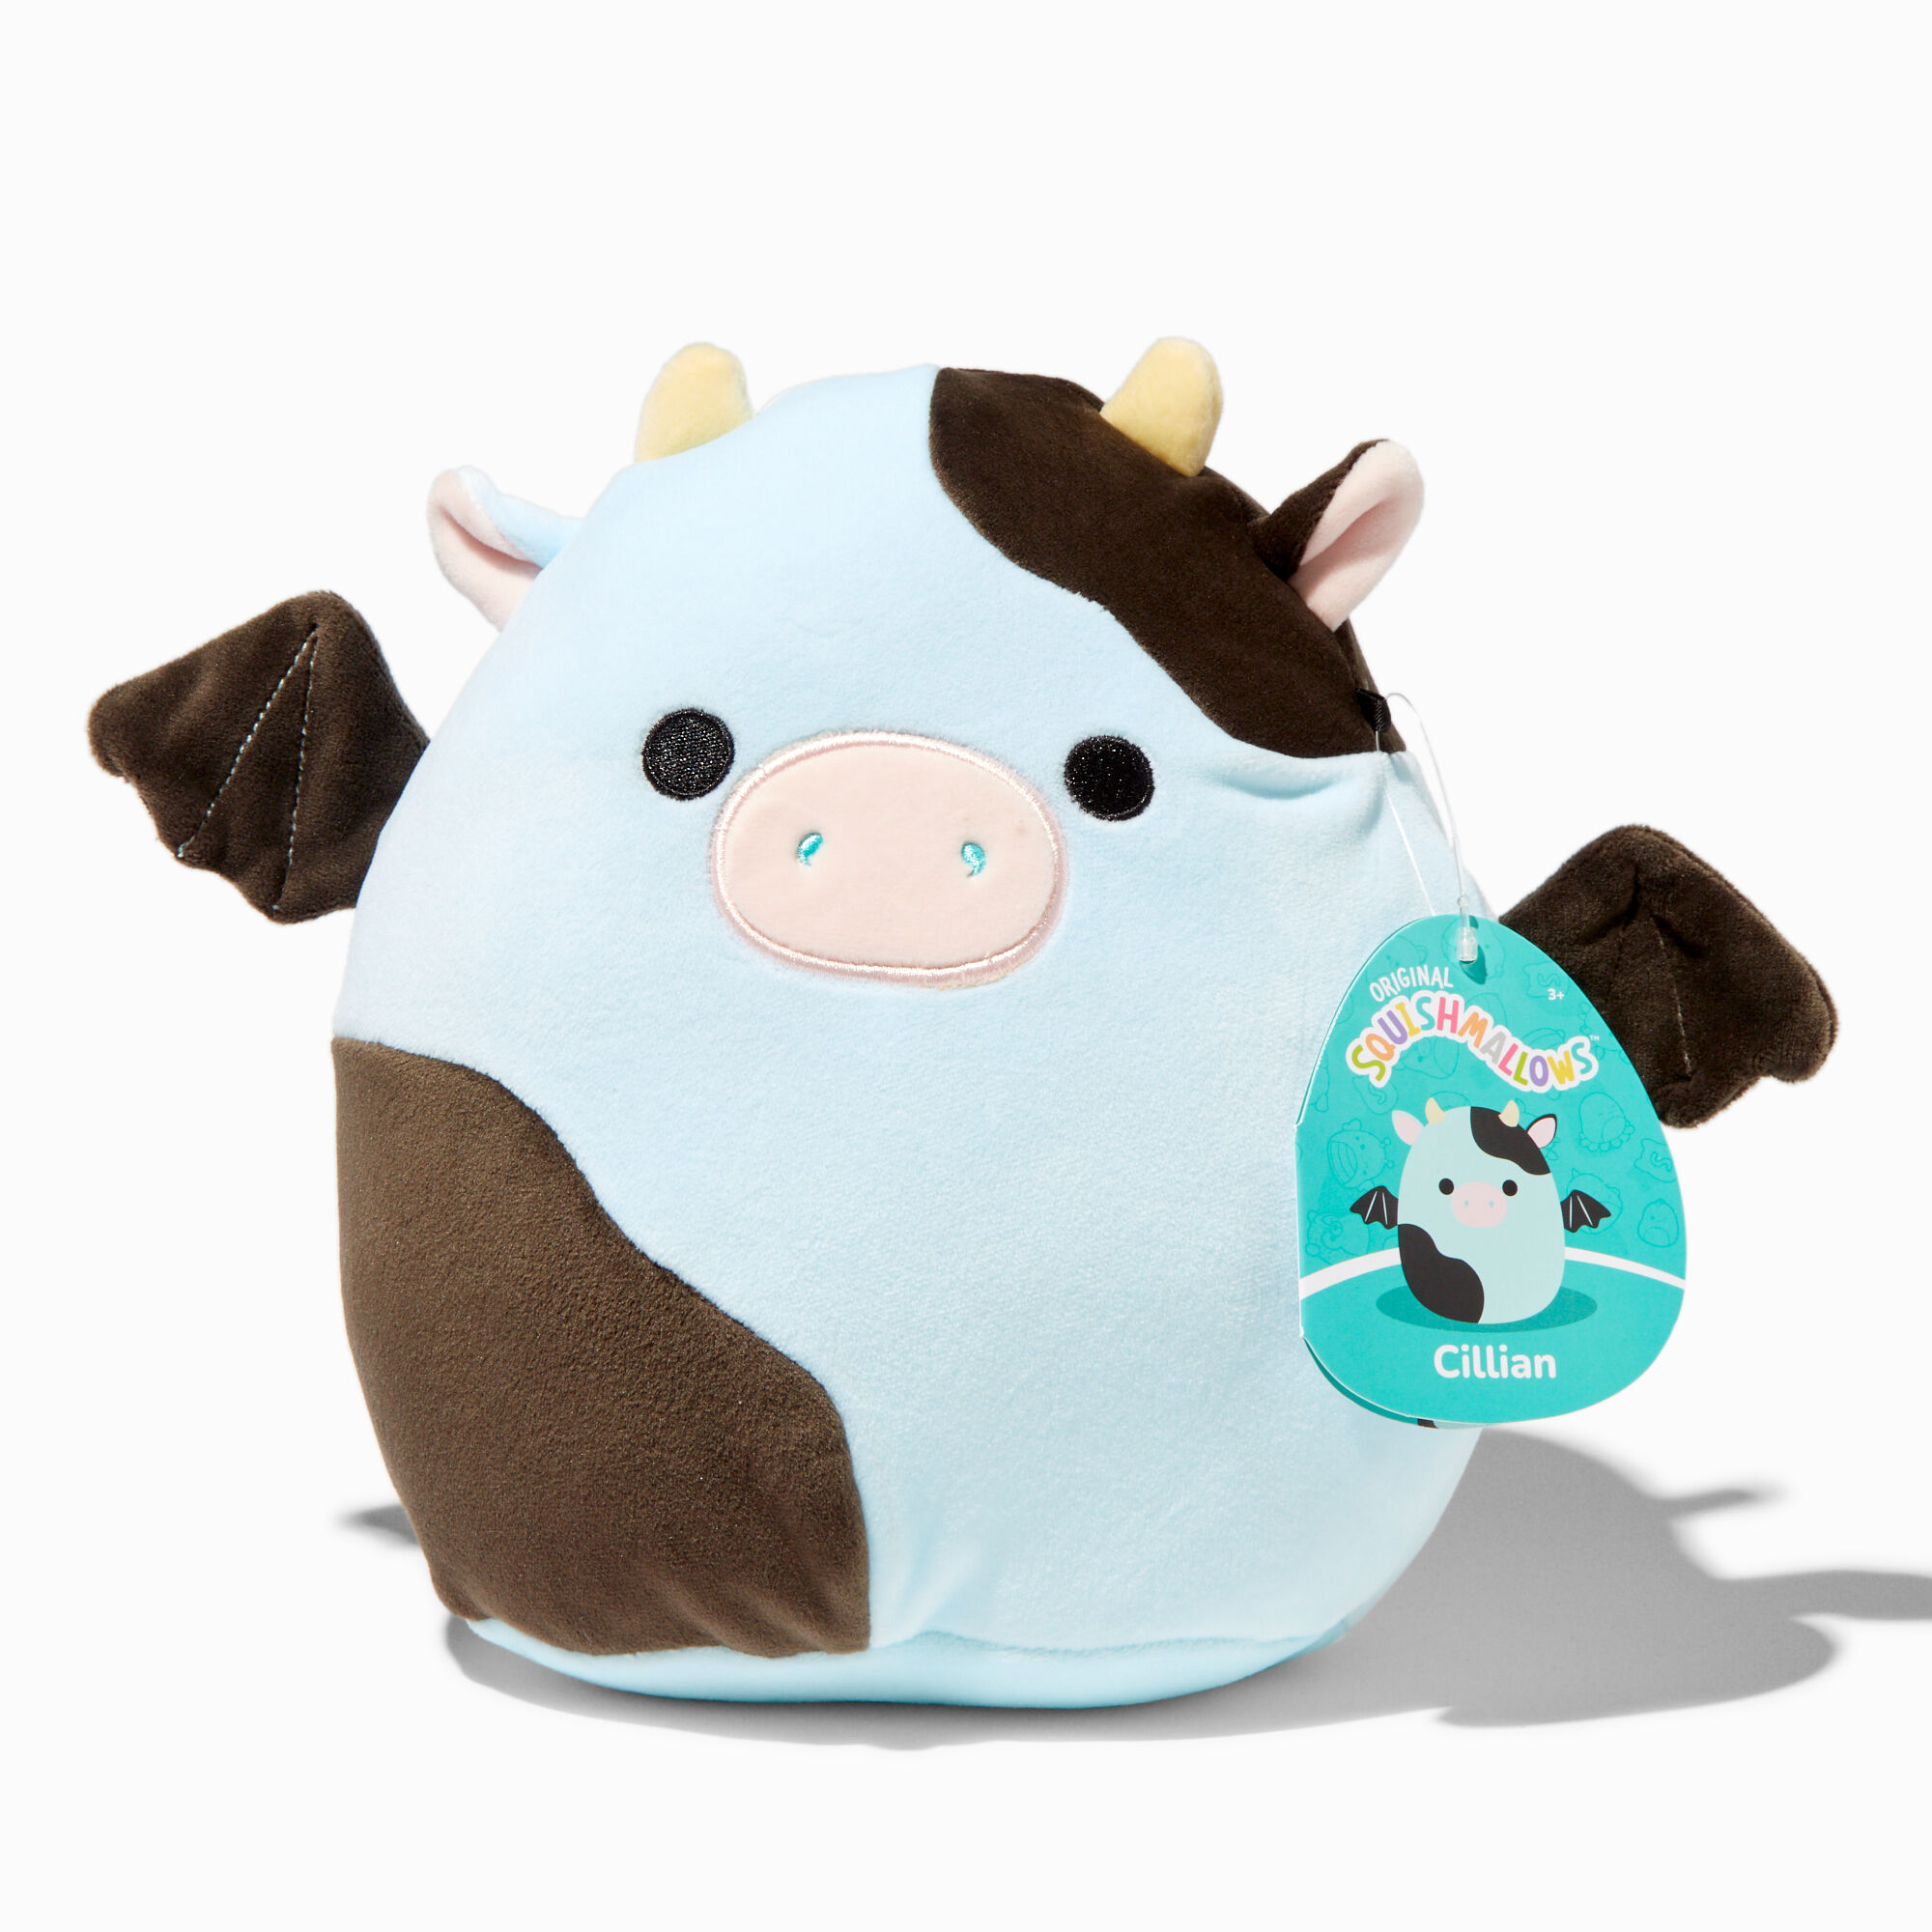 View Claires Squishmallows 8 Cillian The Cow Bat Plush Toy information